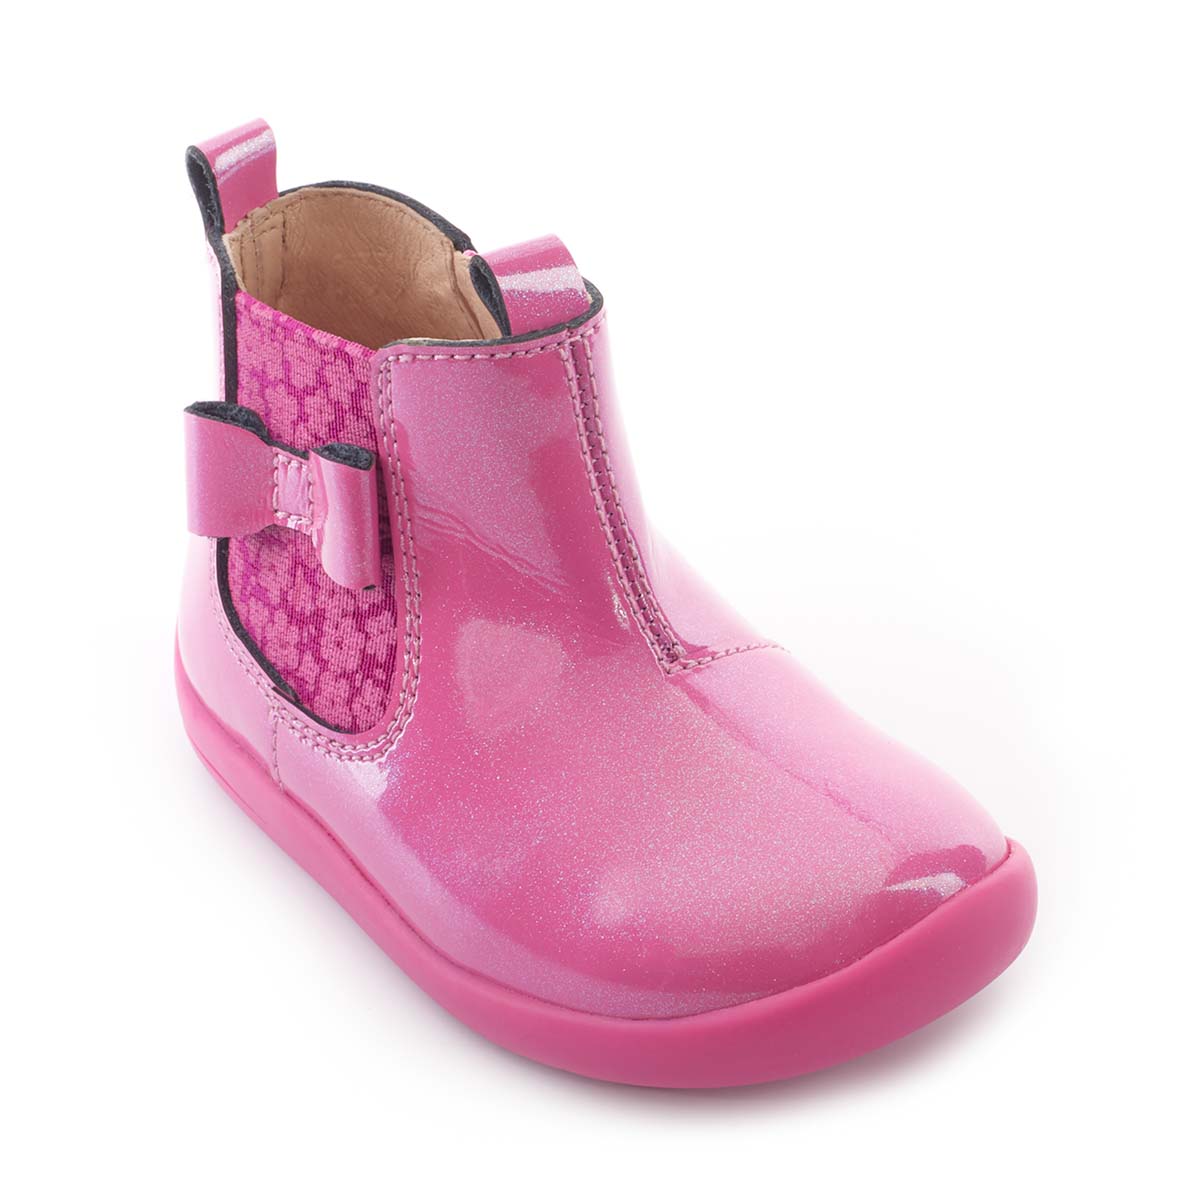 Start Rite - Wonderland Chelsea In Pink 0789-16F In Size 7 In Plain Pink Infant Girls Boots  In Pink For kids